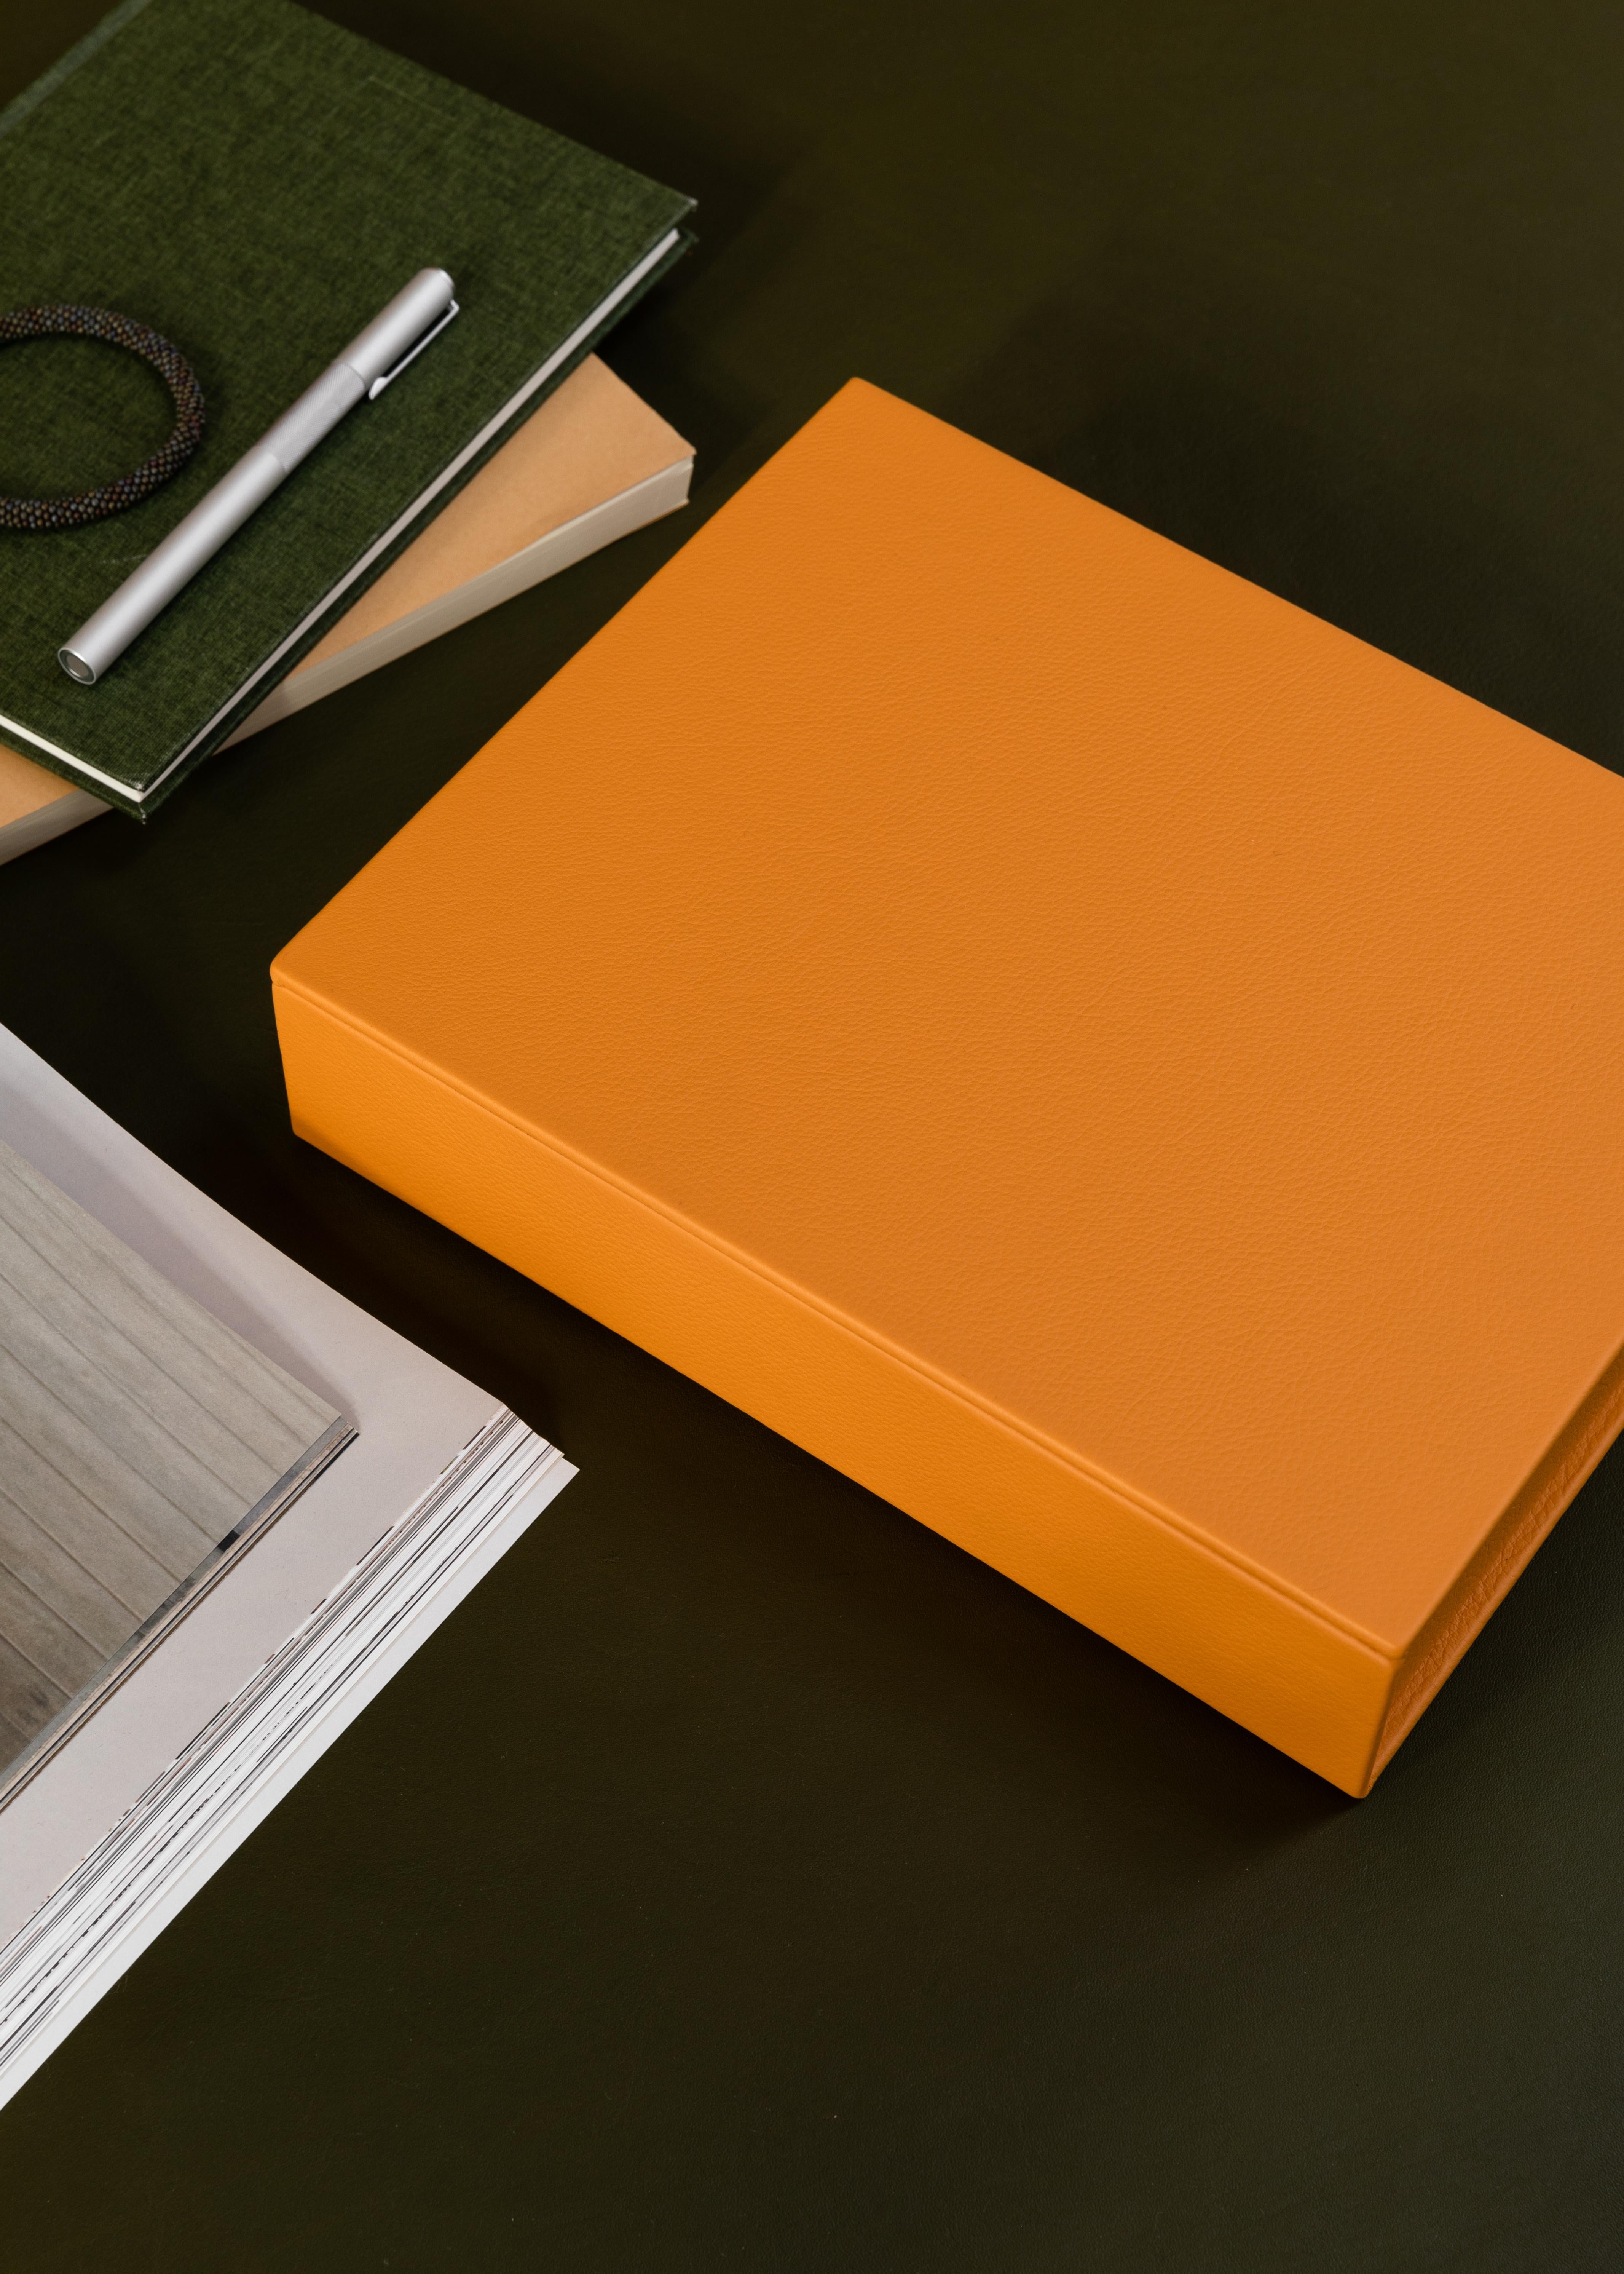 Handcrafted in Portugal from Oekotex-certified leather, this Bookbox is part of August Sandgren's colour collection - it is vibrant, elegant and lights up any room while keeping your cherished belongings in order. Great for small piles of clutter